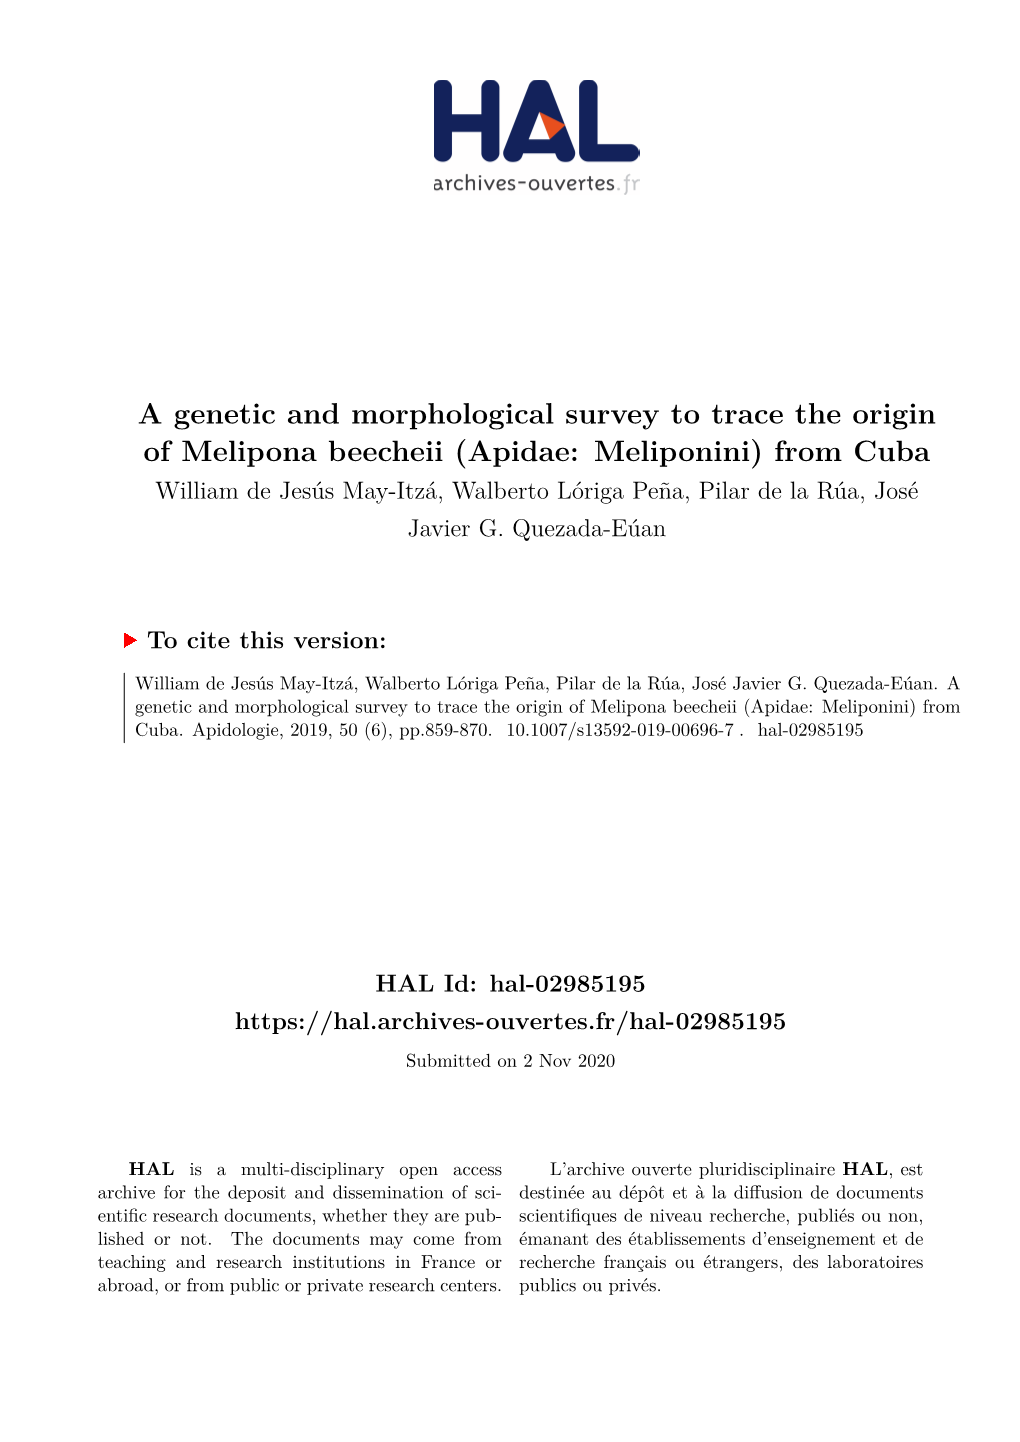 A Genetic and Morphological Survey to Trace the Origin of Melipona